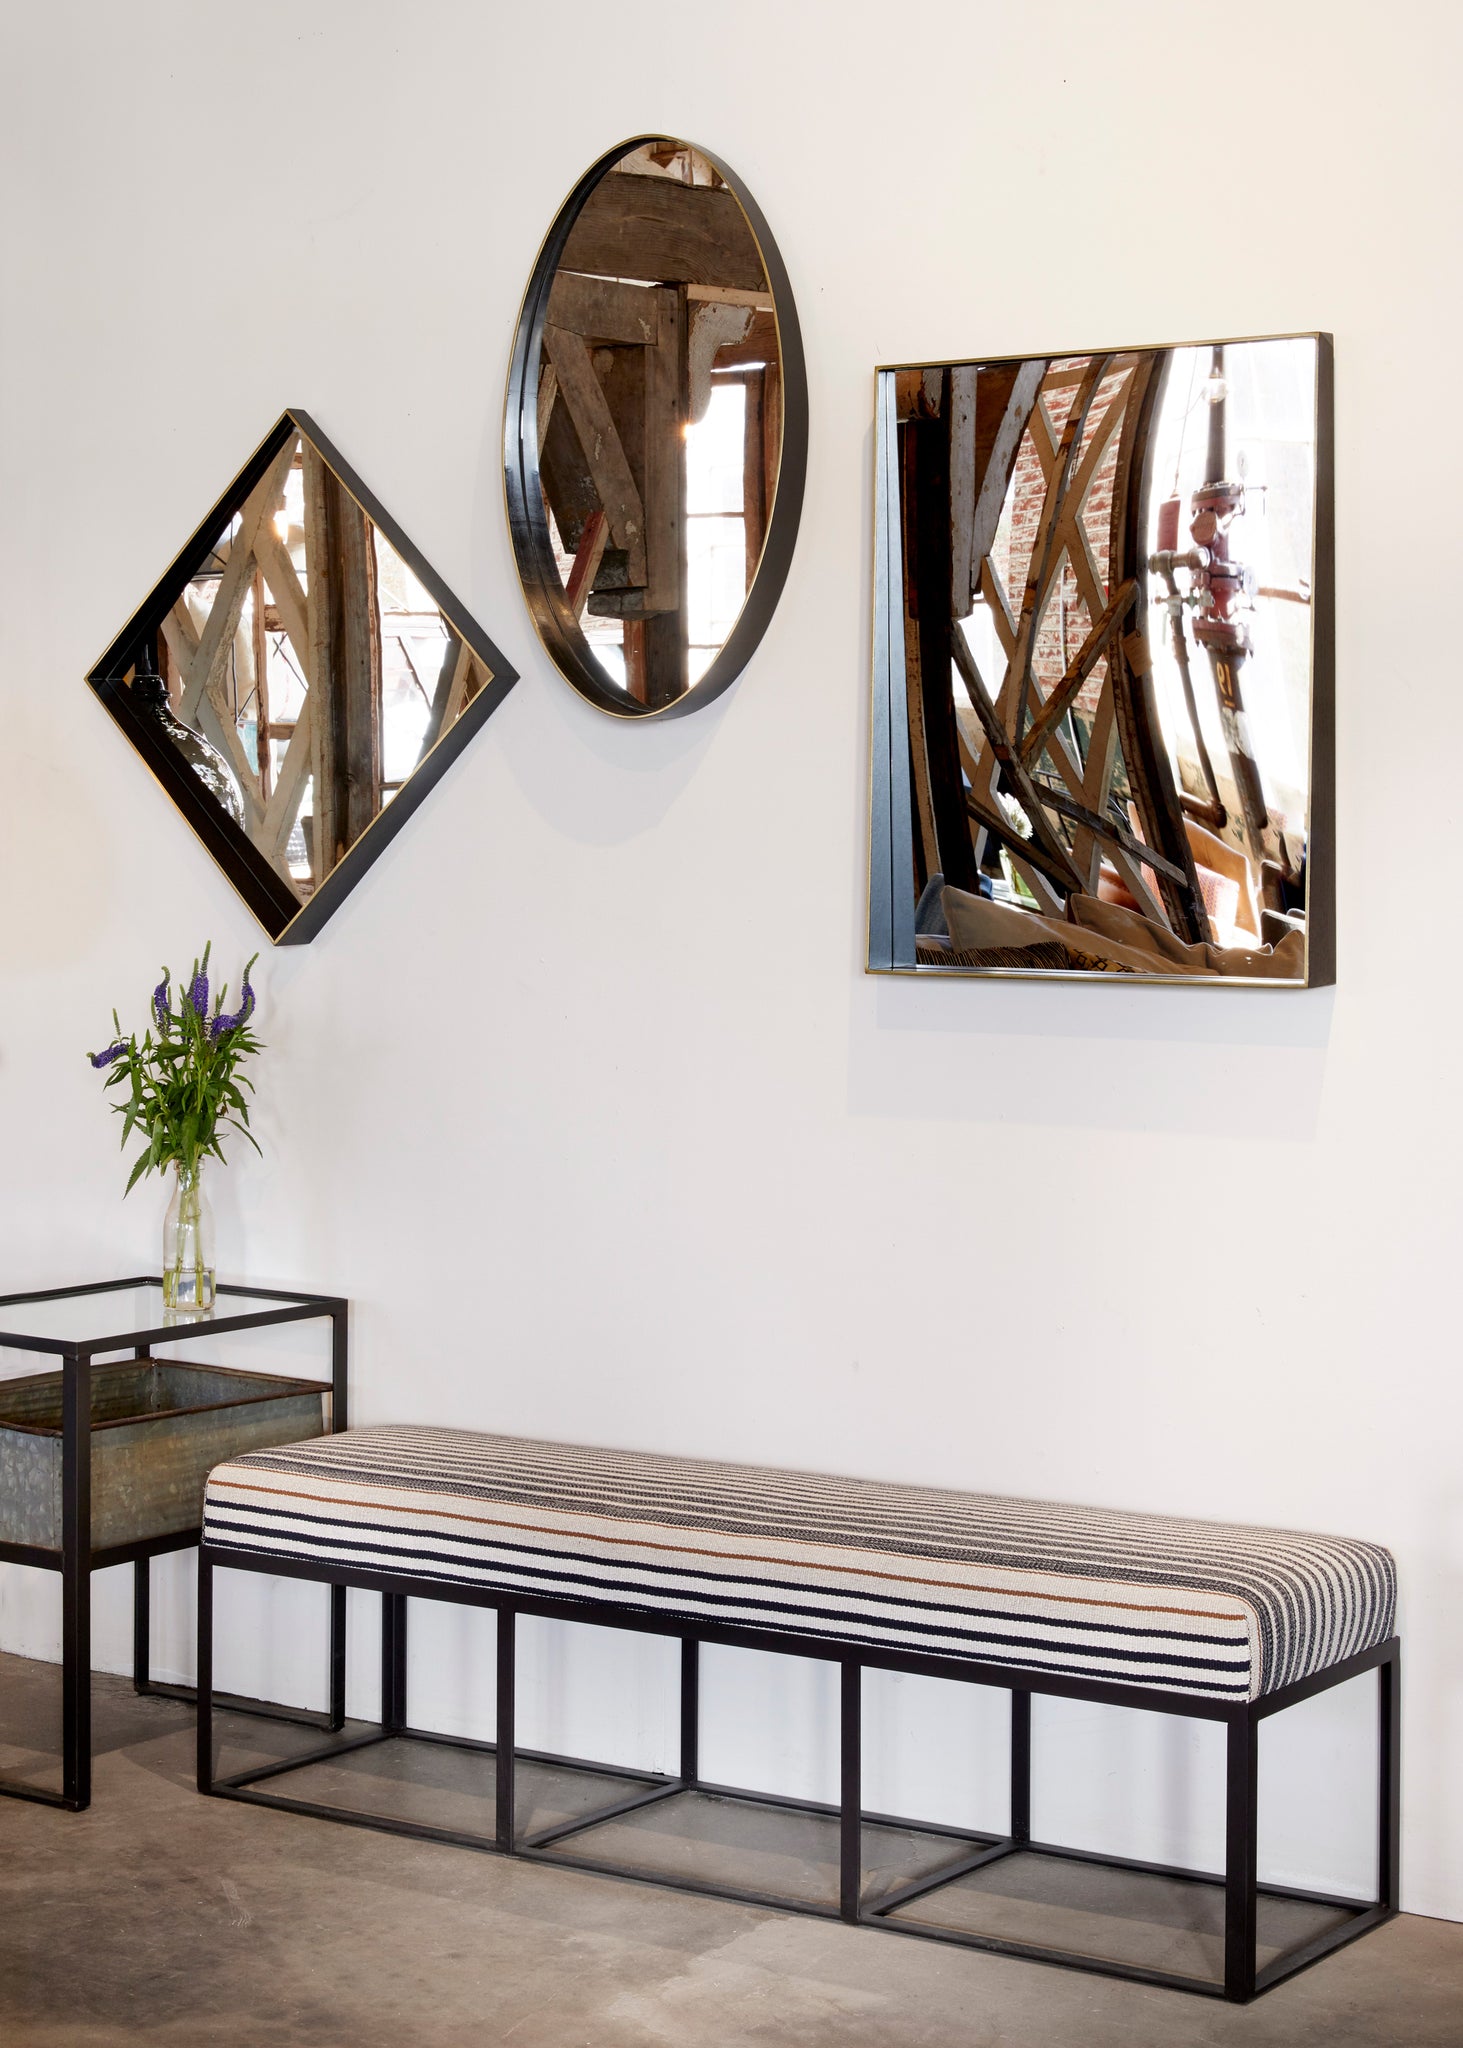  Cruz bench in Rayas Fino next to white wall with three mirrors hanging above it. Photographed in Rayas Fino. 